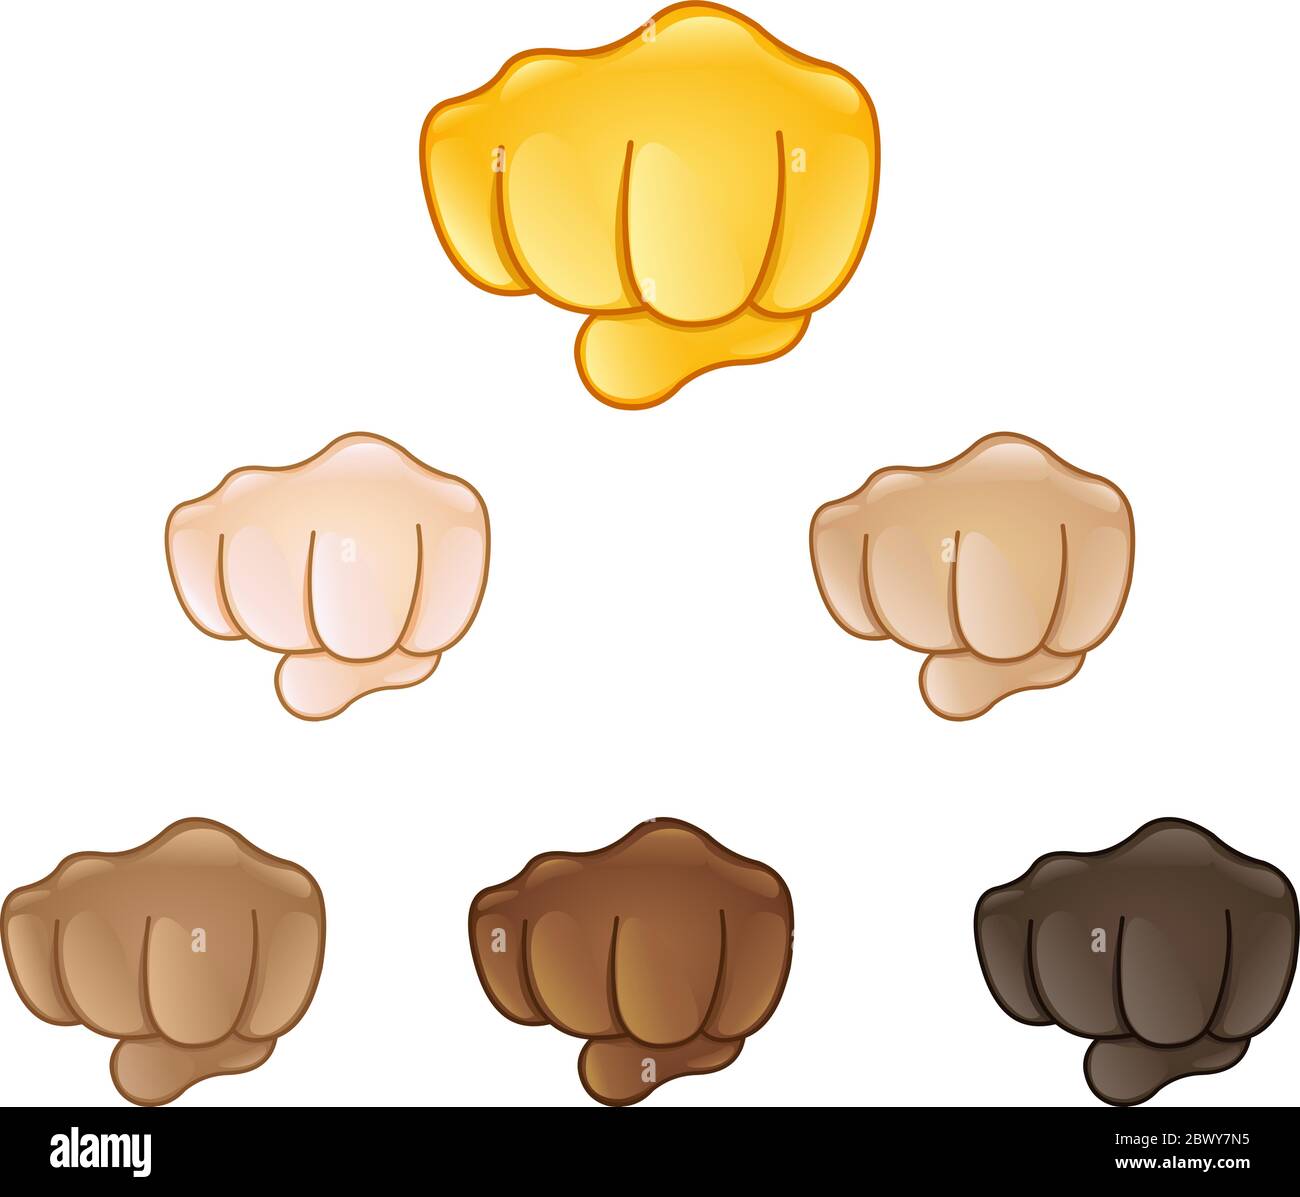 Fisted hand sign emoji set of various skin tones Stock Vector